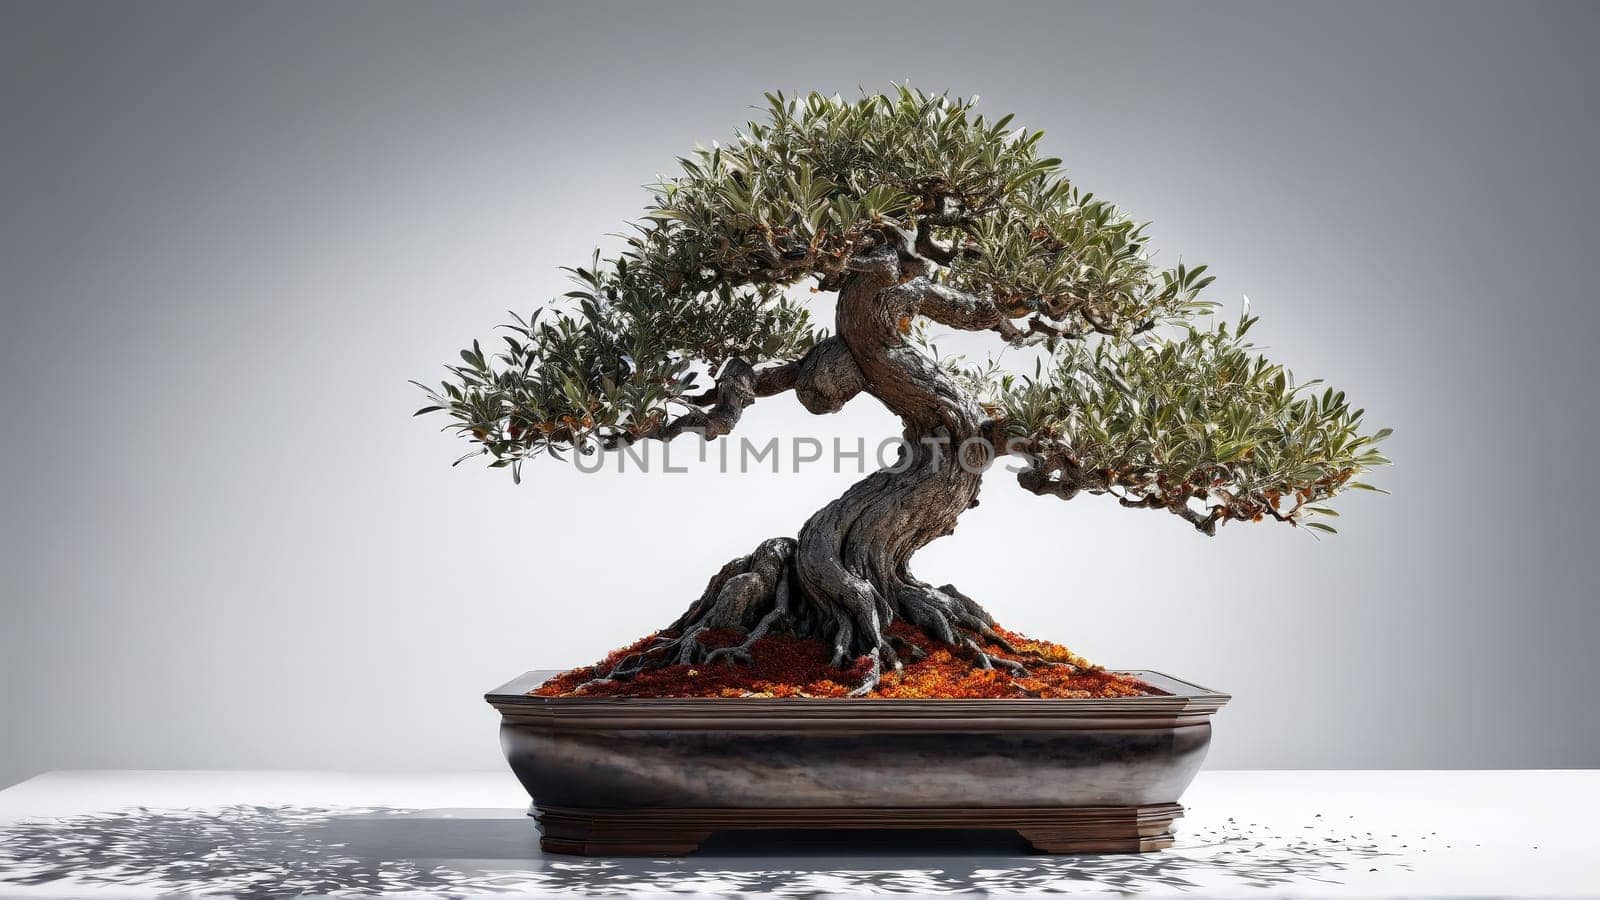 Abstract background with bonsai tree